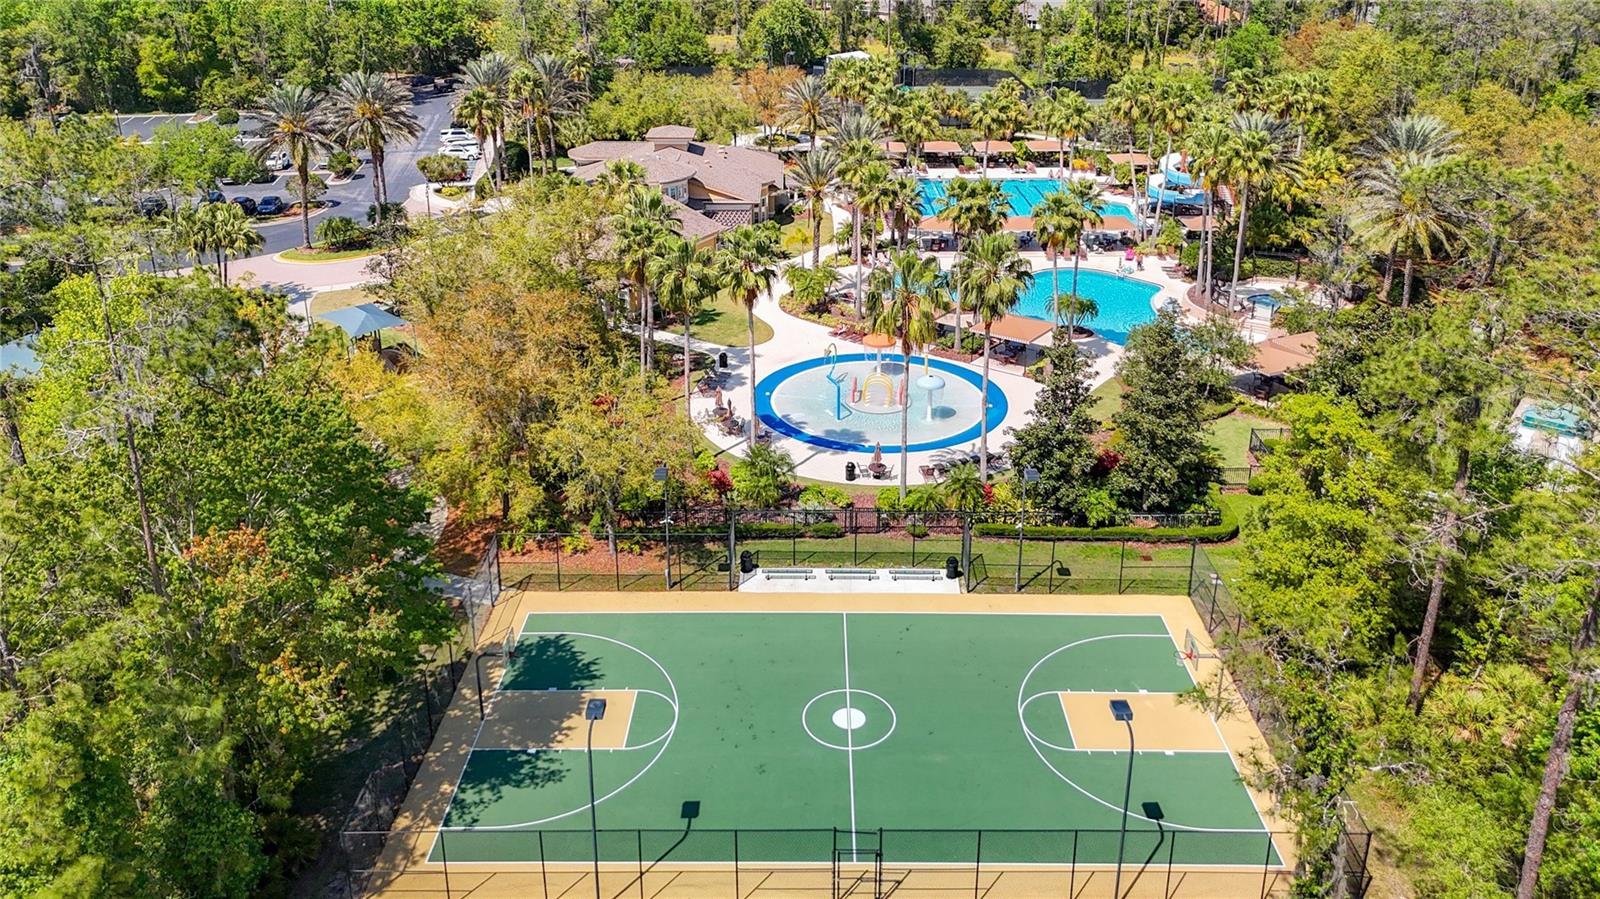 great view of Some of the many amenities offered at clubhouse no additional fees to use pool or tennis courts or basket ball, ther eis a volley ball court near by as well.